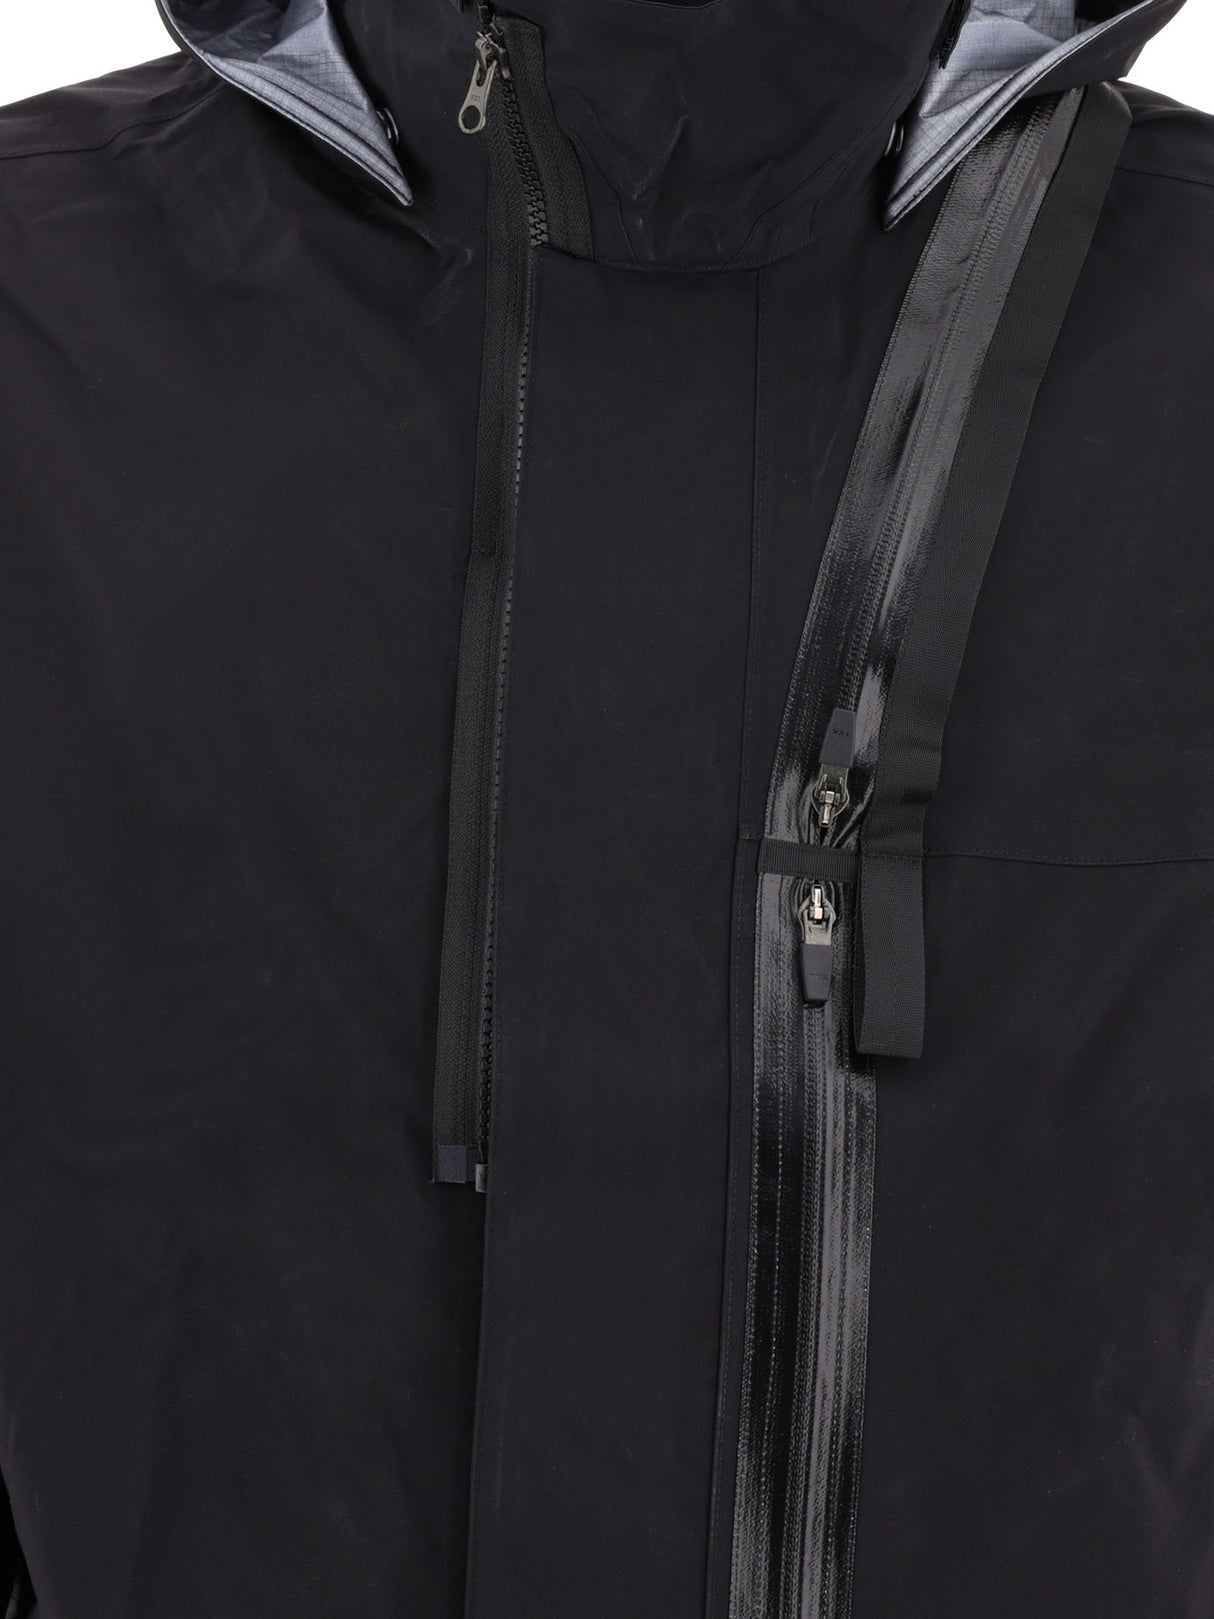 ACRONYM Men's Relaxed Fit Black Jacket for FW23